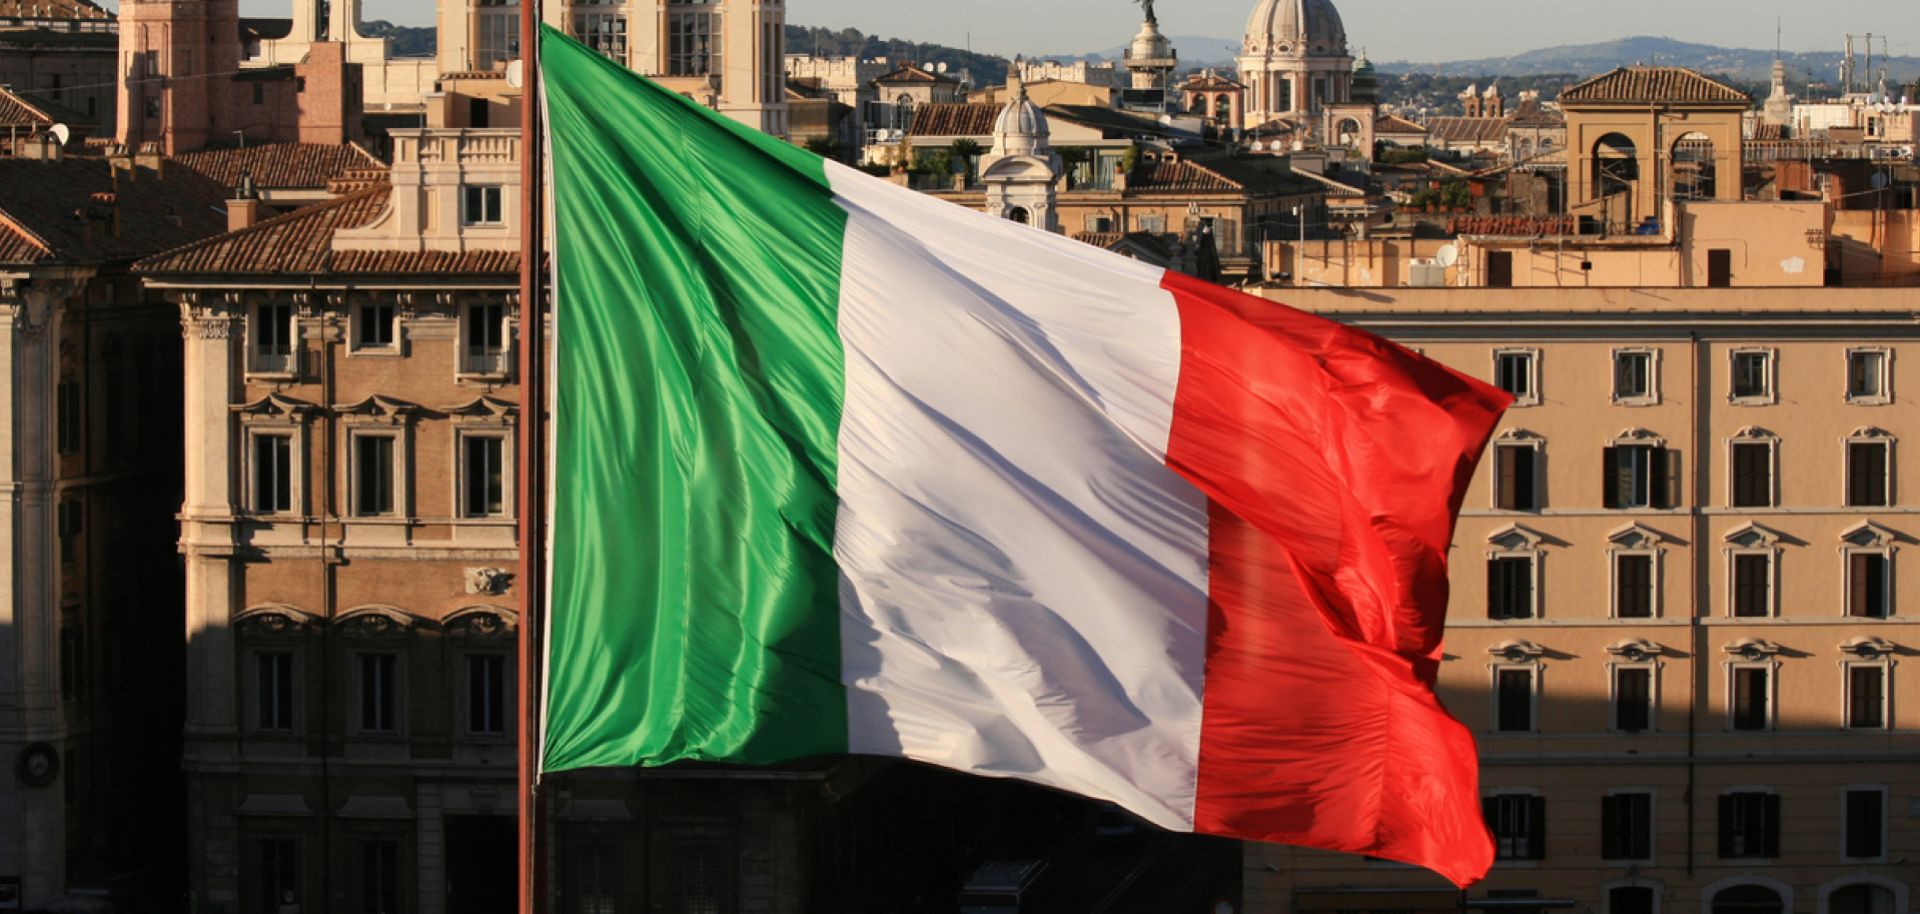 Fears earlier this year that events in France and Germany would threaten eurozone continuity have passed, but another challenge awaits Europe's currency area: Italy.